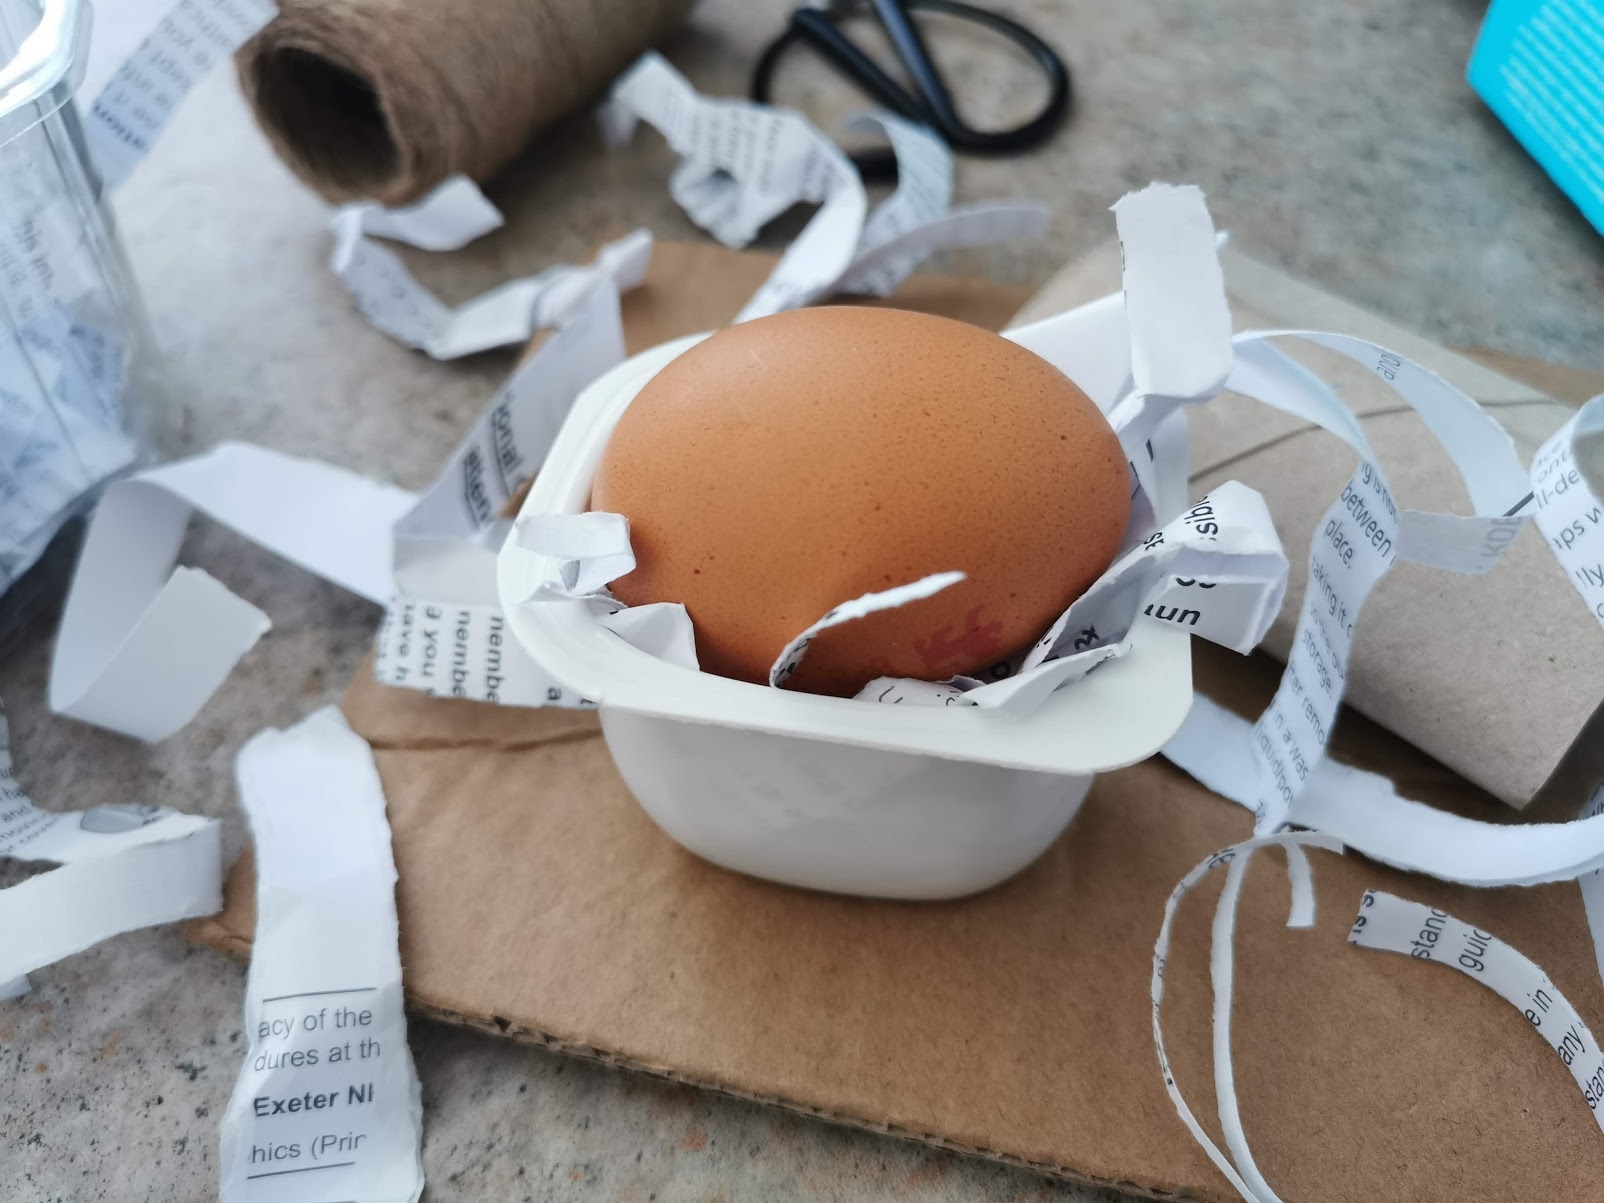 An egg rests in a yogurt pot filled with shredded paper. There are various recyclable materials in the background of the image, including cardboard along with scissors and string.